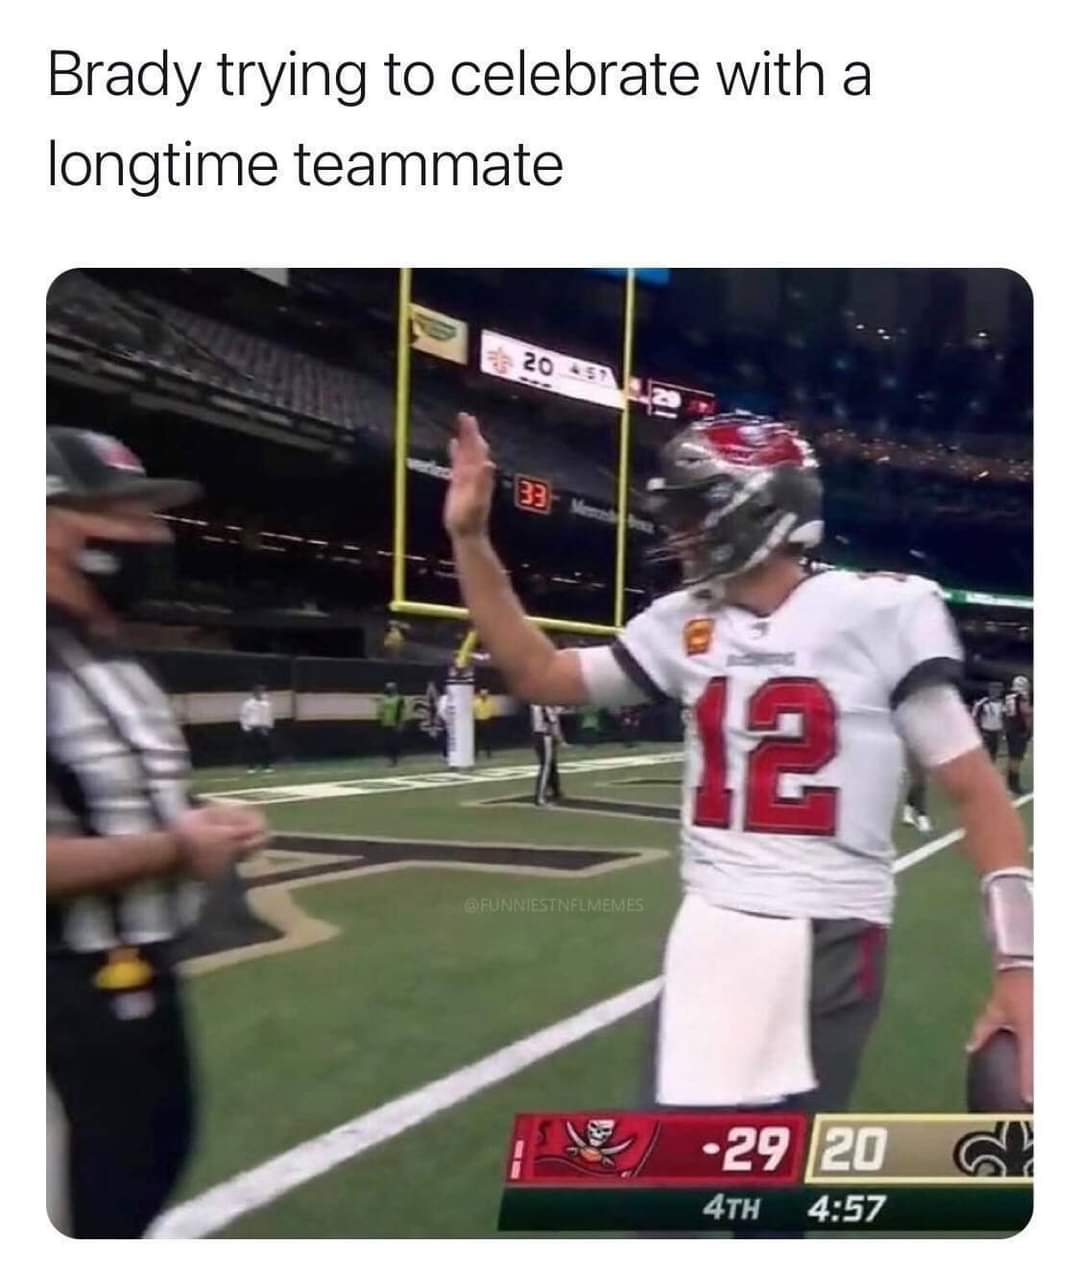 games - Brady trying to celebrate with a longtime teammate 20 151 33 12 Funniestnflmemes 29 20 4TH